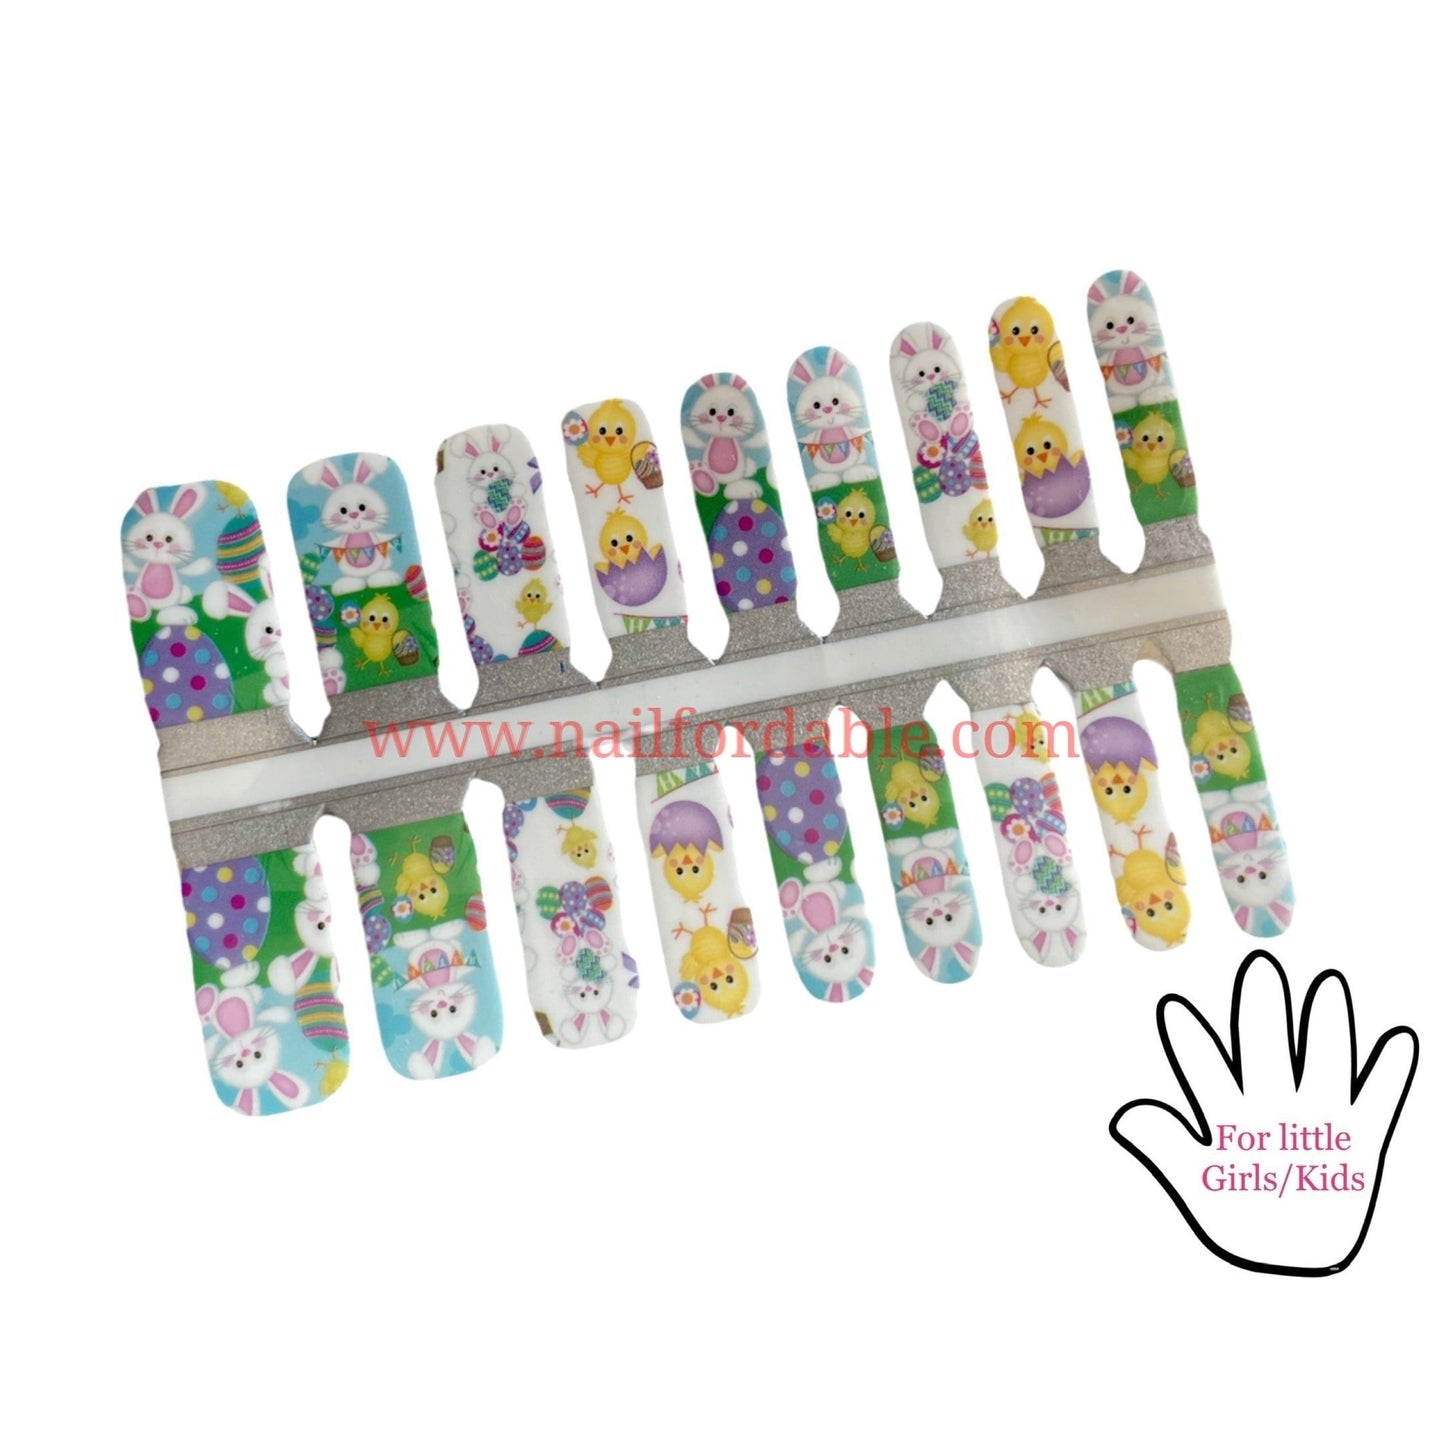 Easterâ€™s egg hunting Nail Wraps | Semi Cured Gel Wraps | Gel Nail Wraps |Nail Polish | Nail Stickers